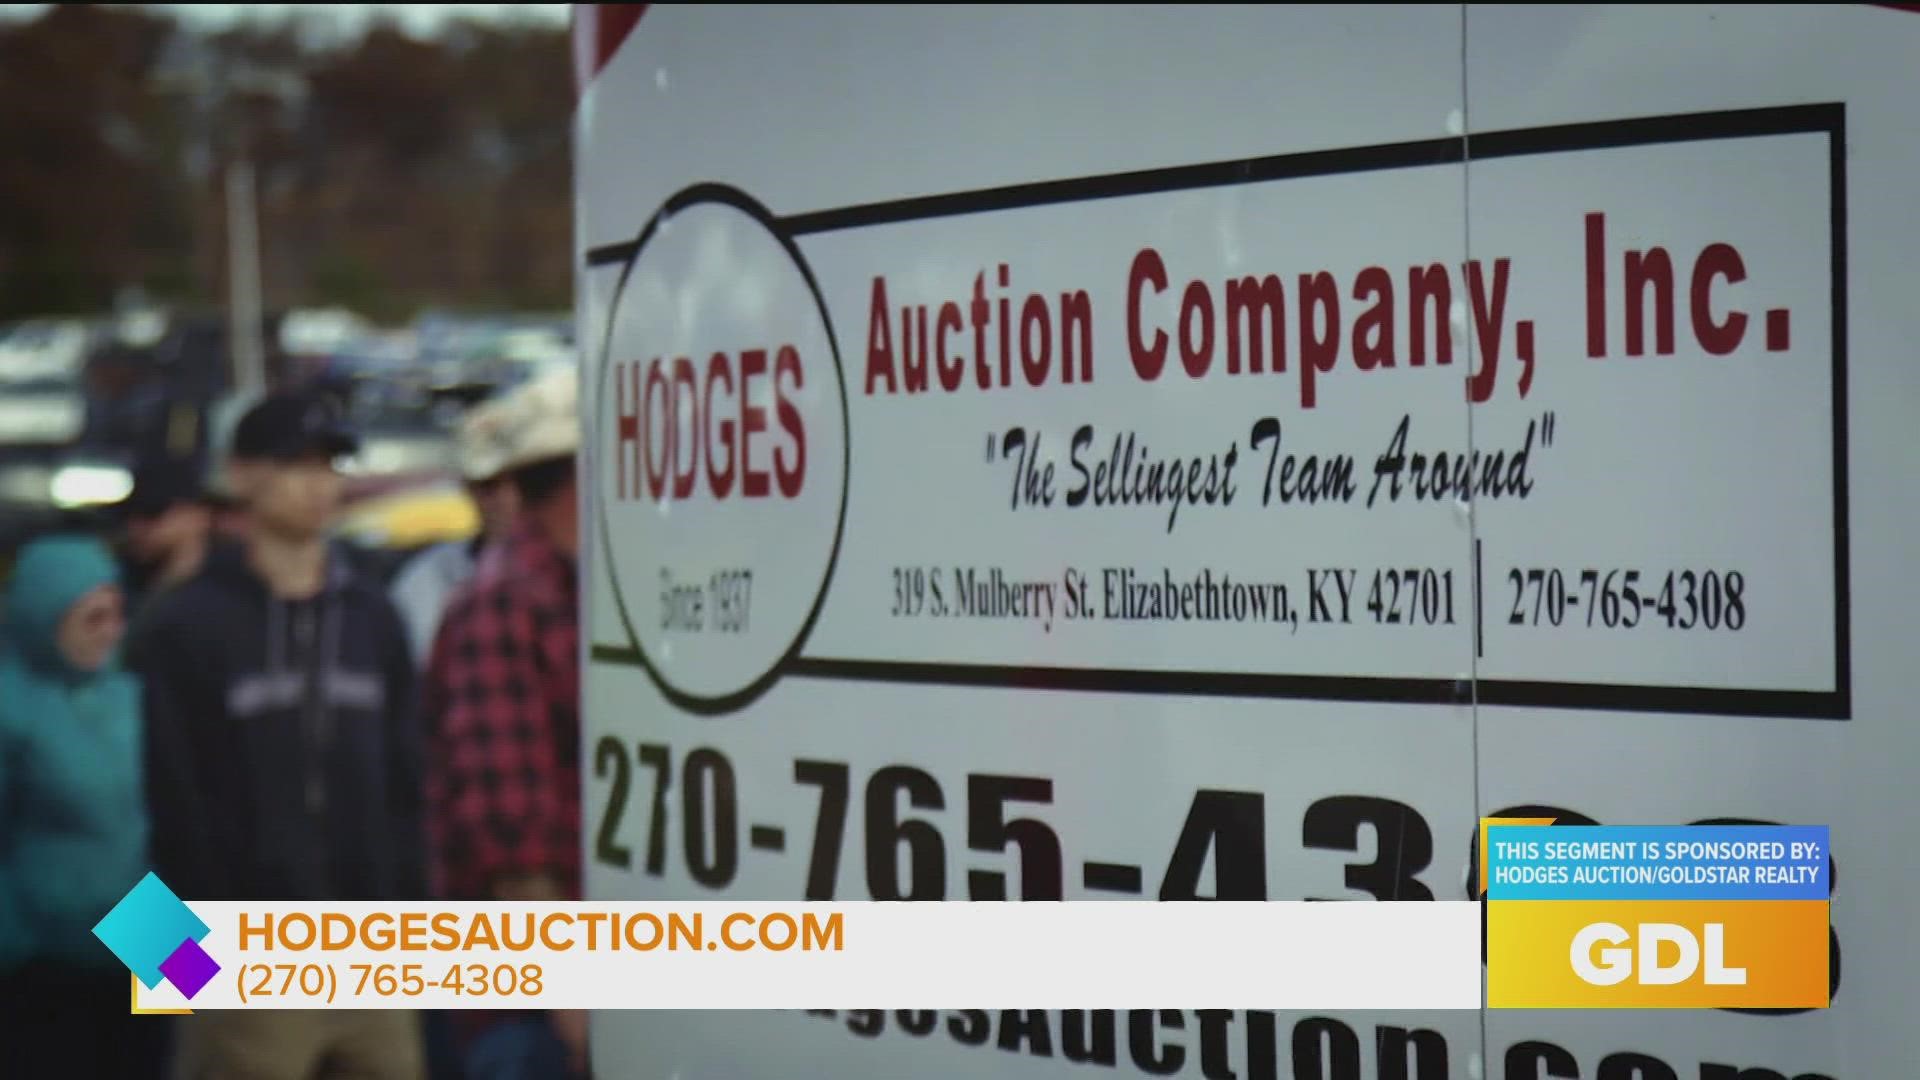 To learn more about Hodge's Auction Company, visit hodgesauction.com.